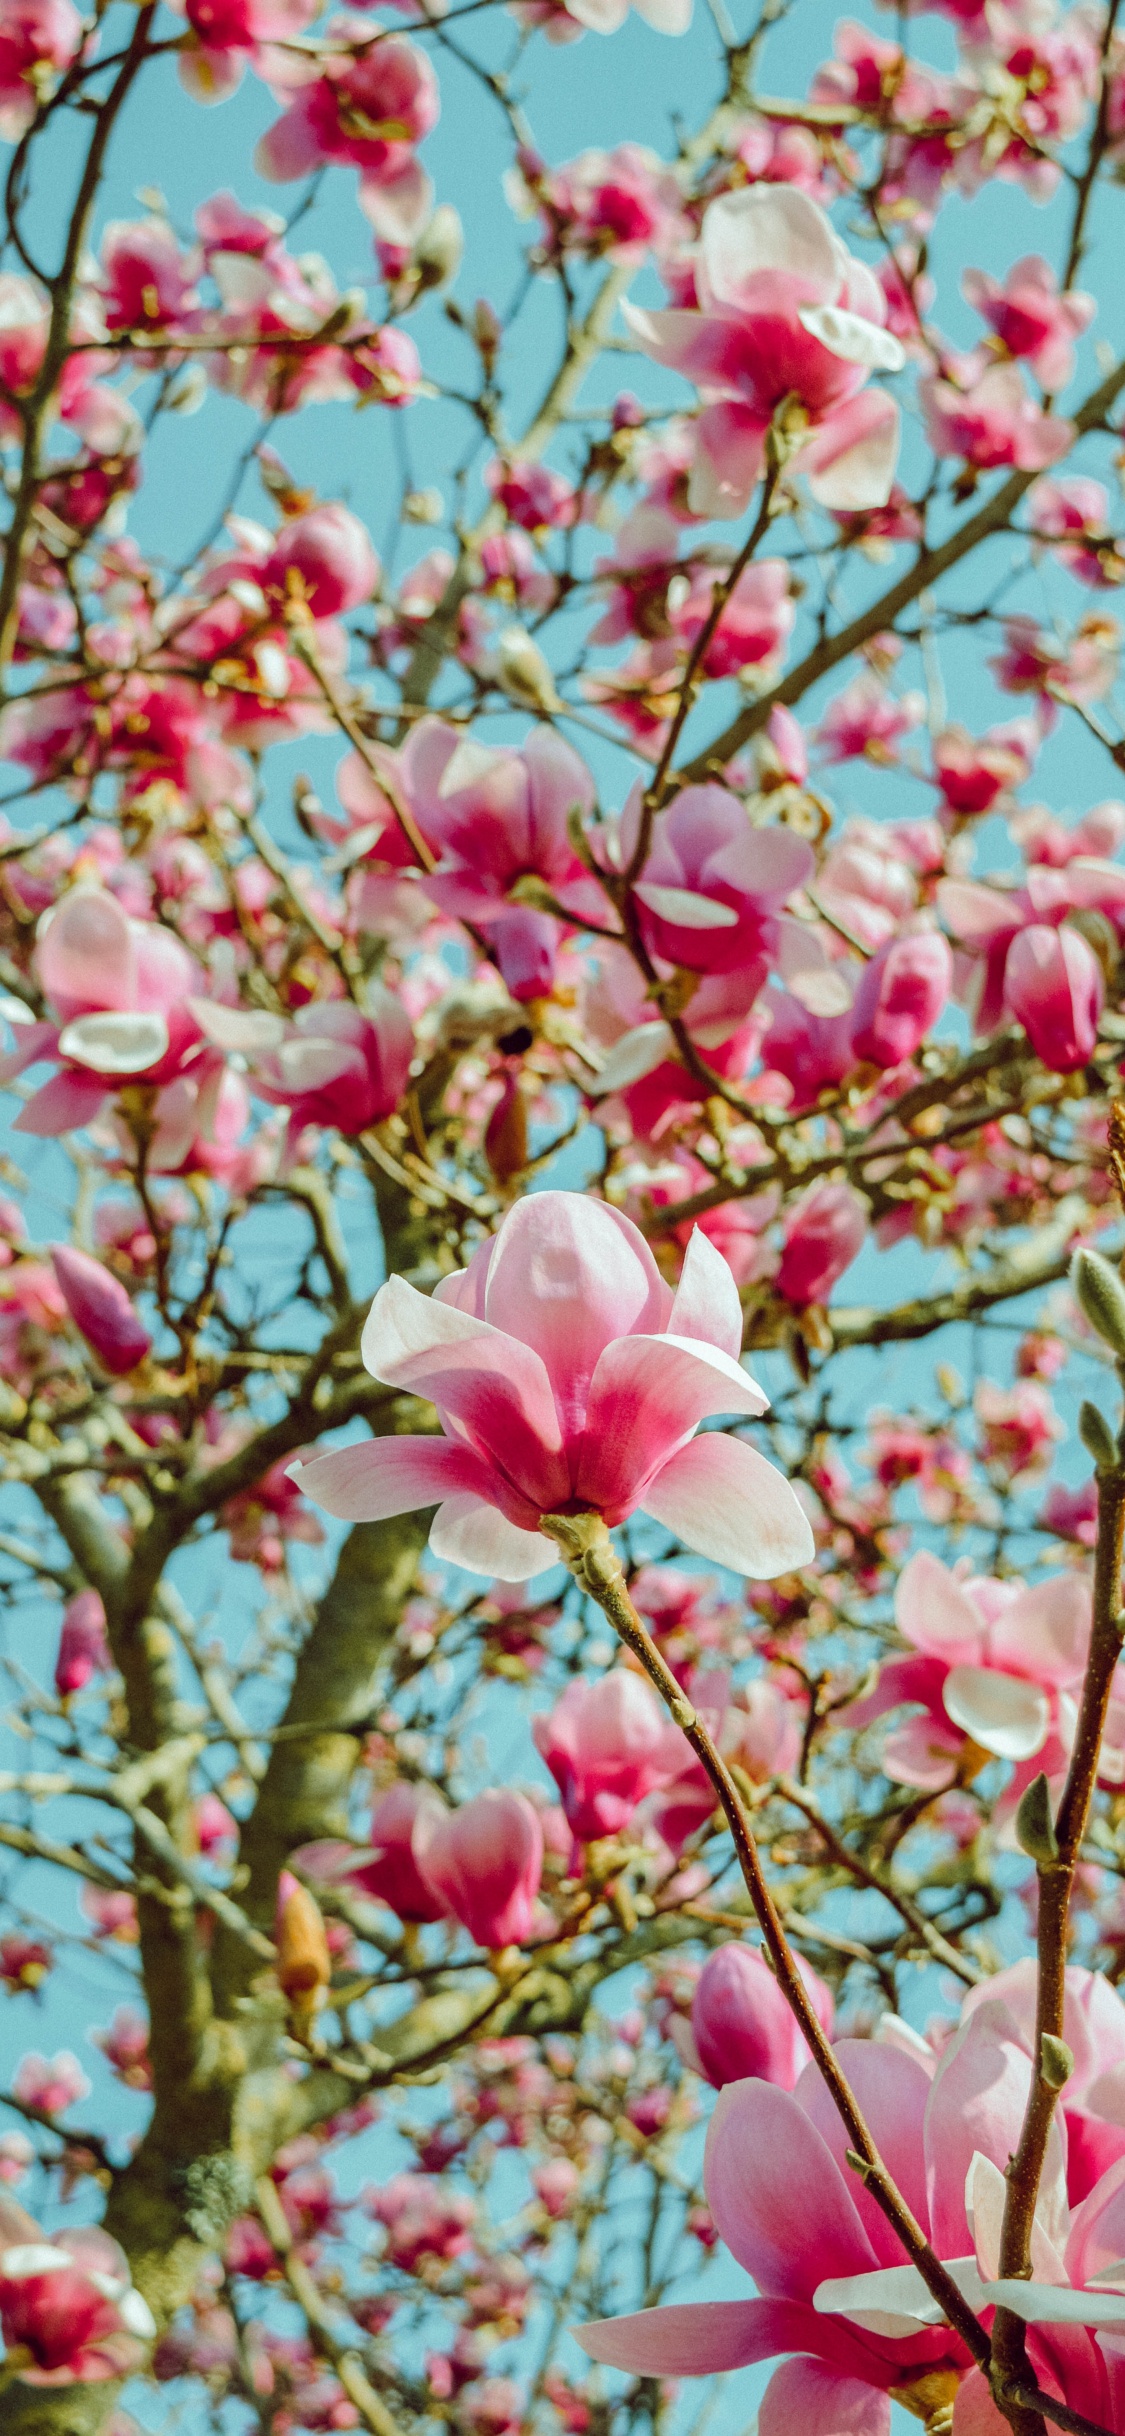 Pink Cherry Blossom in Bloom During Daytime. Wallpaper in 1125x2436 Resolution